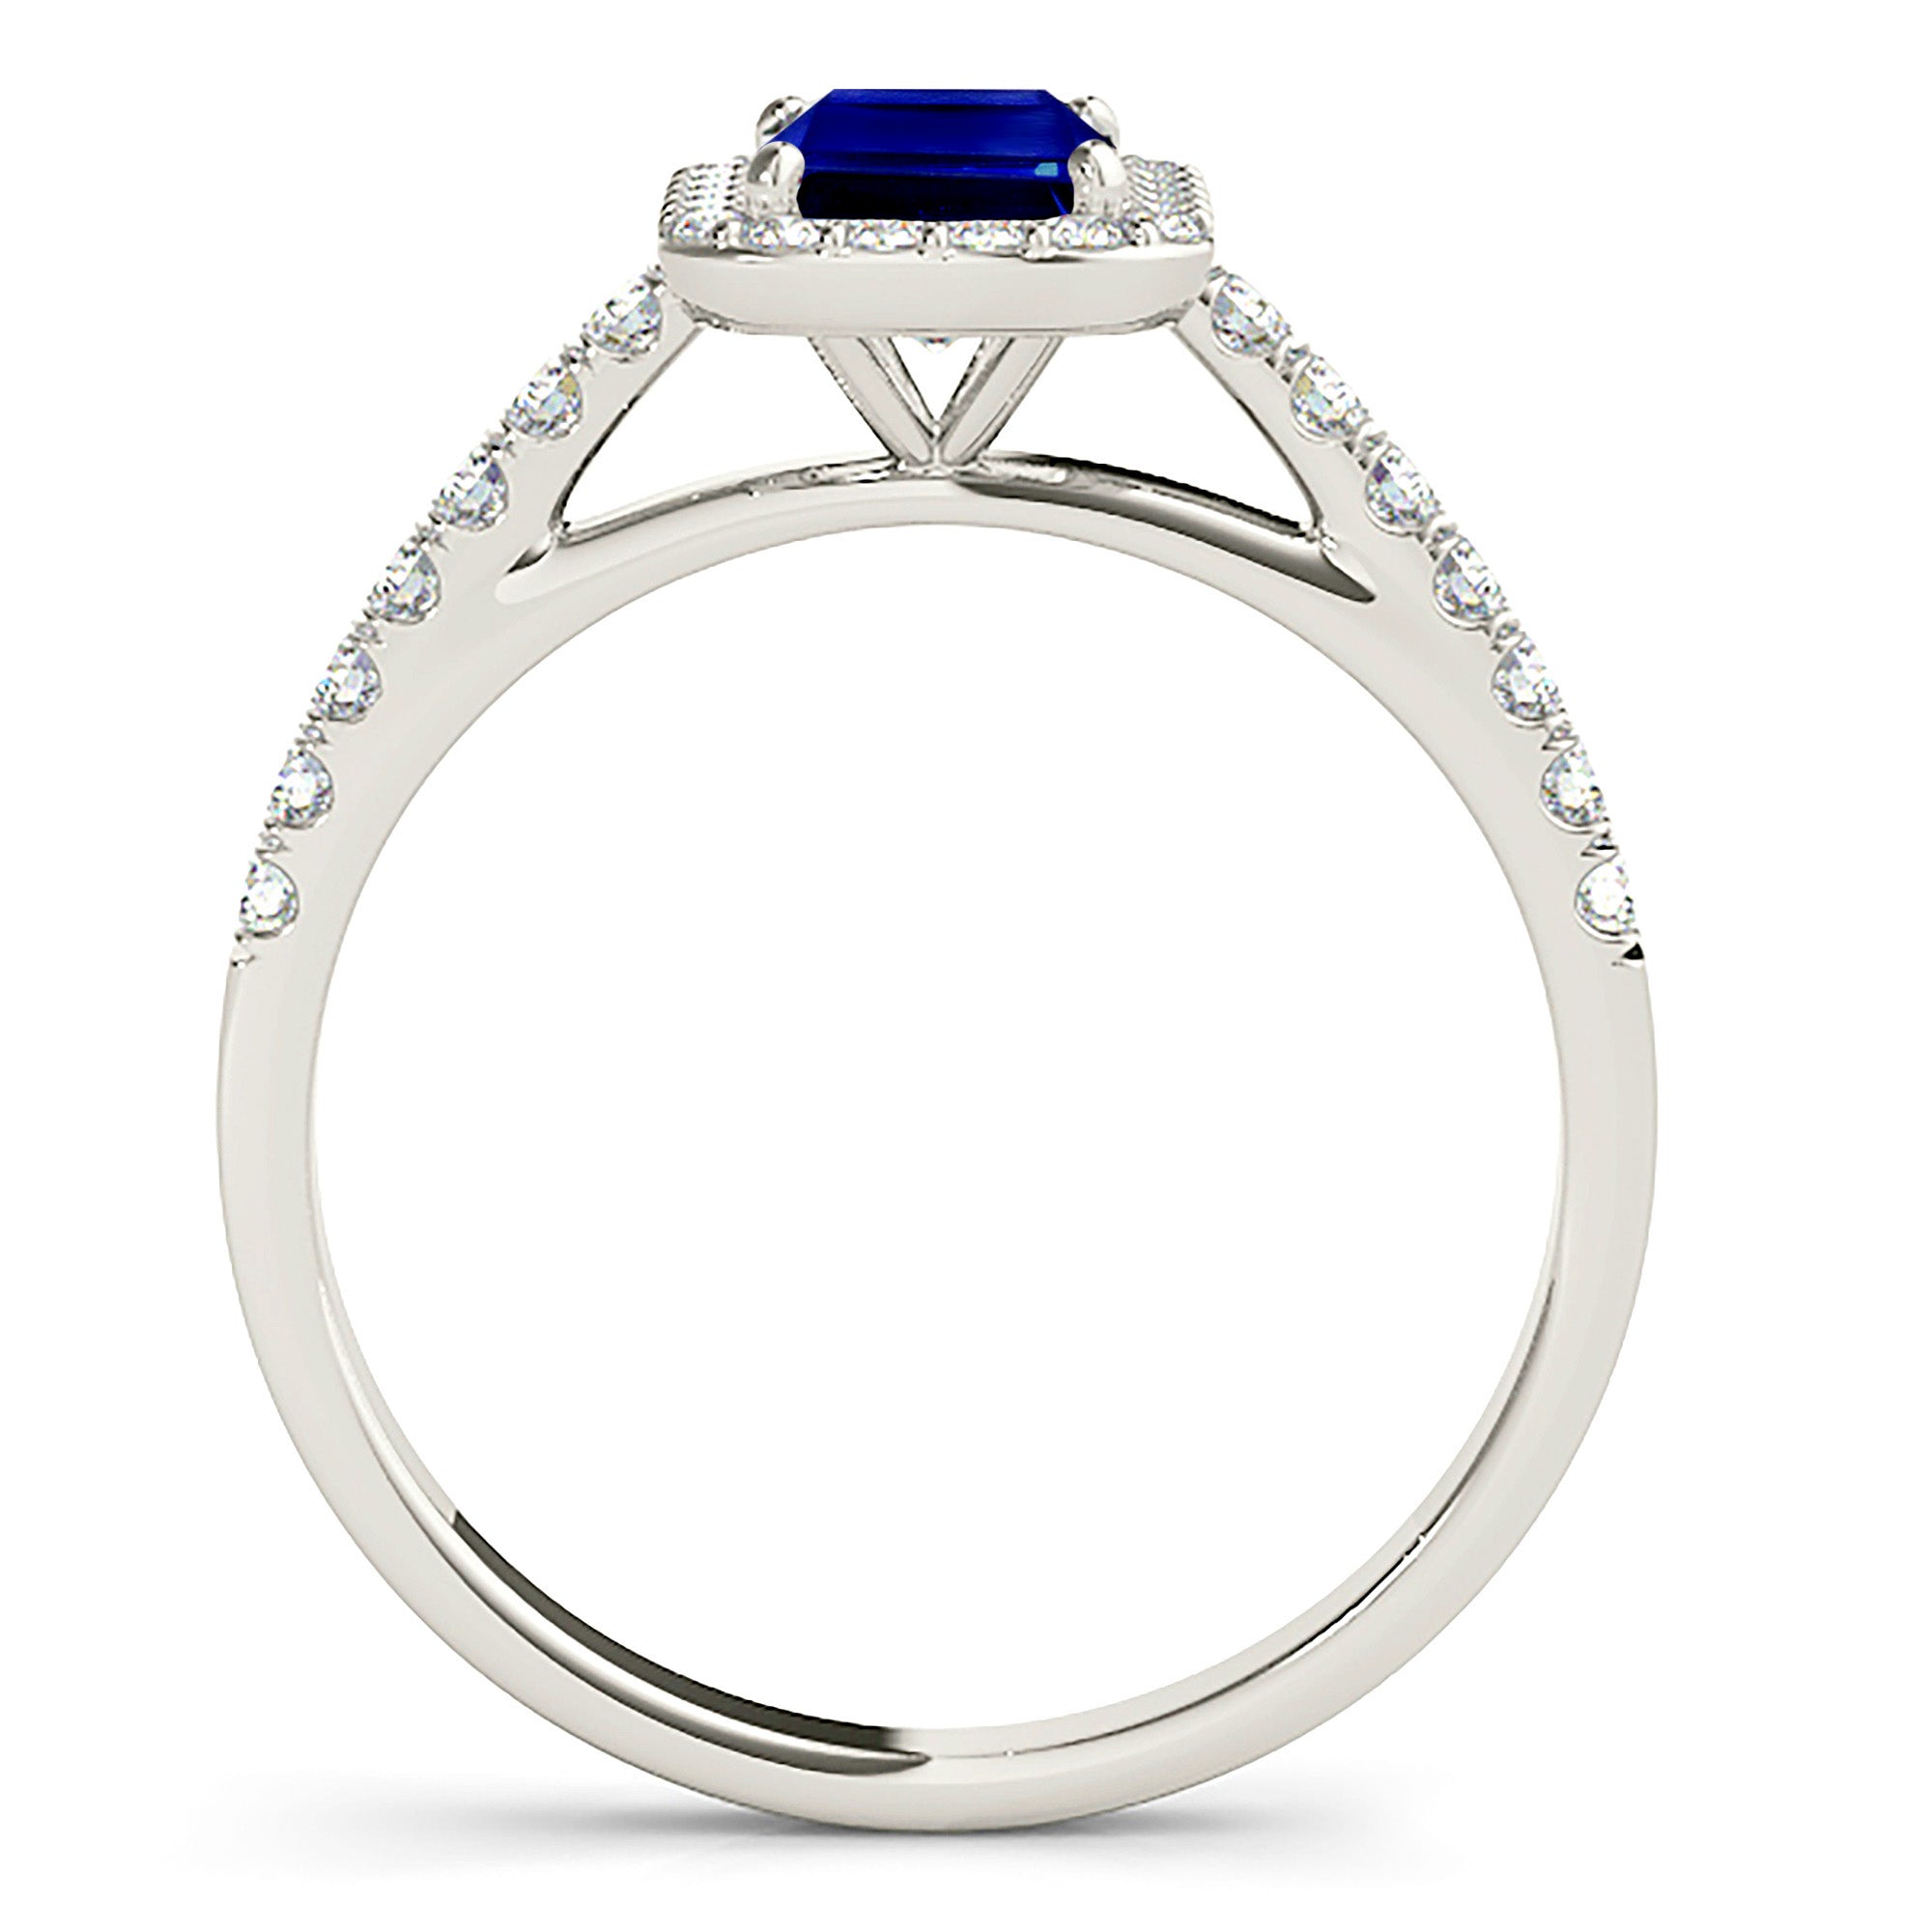 1.15 ct. Genuine Blue Emerald Cut Sapphire Ring With 0.25 ctw. Diamond Halo, Delicate Diamond Band | Natural Sapphire And Diamond Ring-in 14K/18K White, Yellow, Rose Gold and Platinum - Christmas Jewelry Gift -VIRABYANI